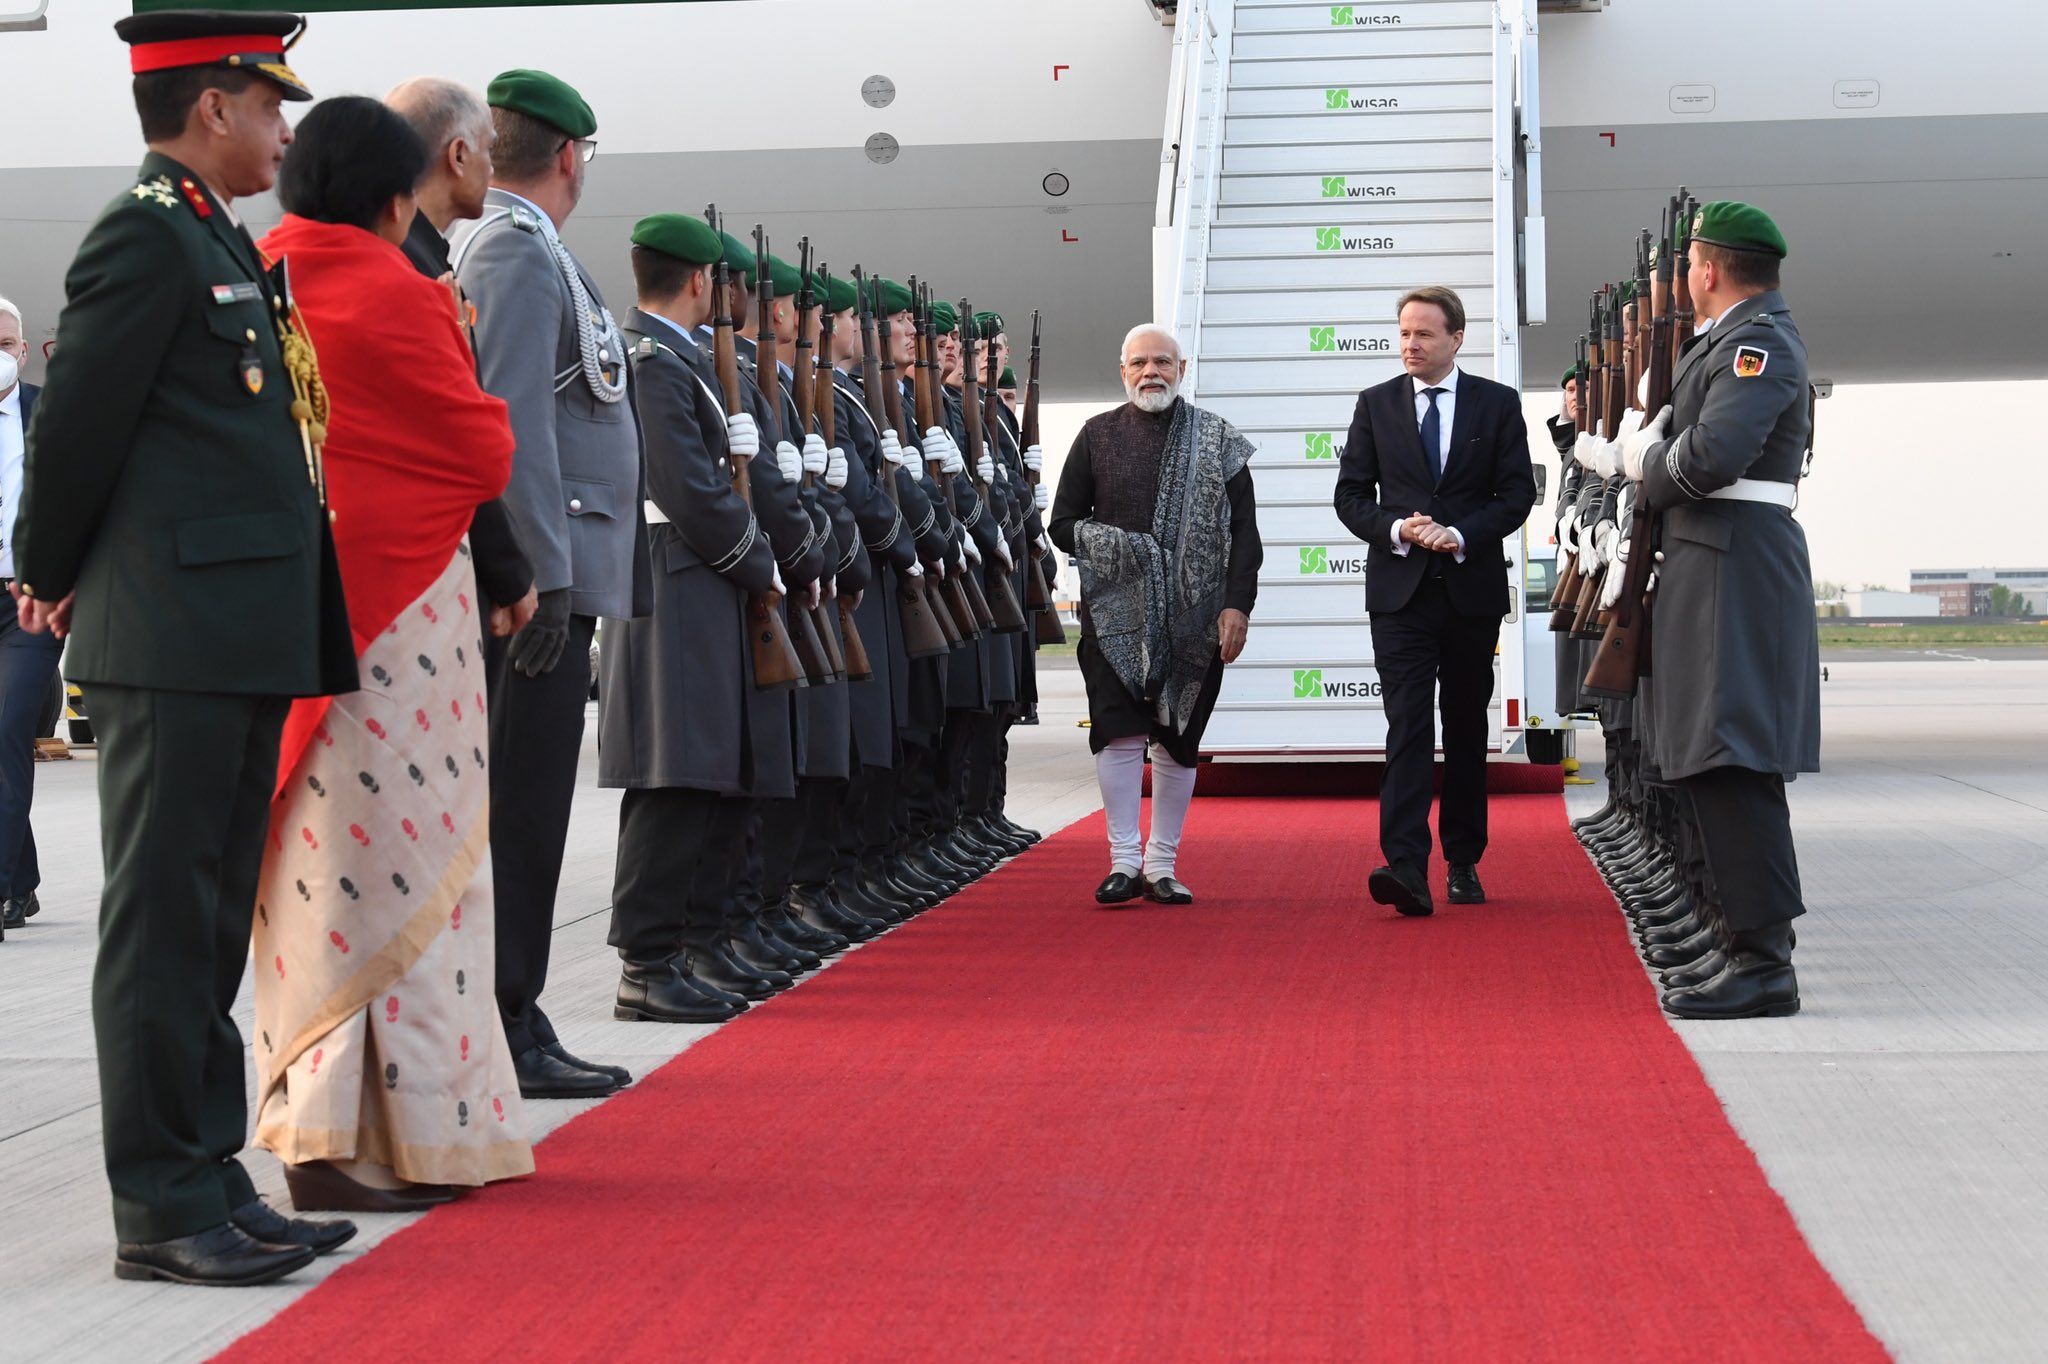 PM Modi in Europe: Key highlights of his meeting with German Chancellor Scholz